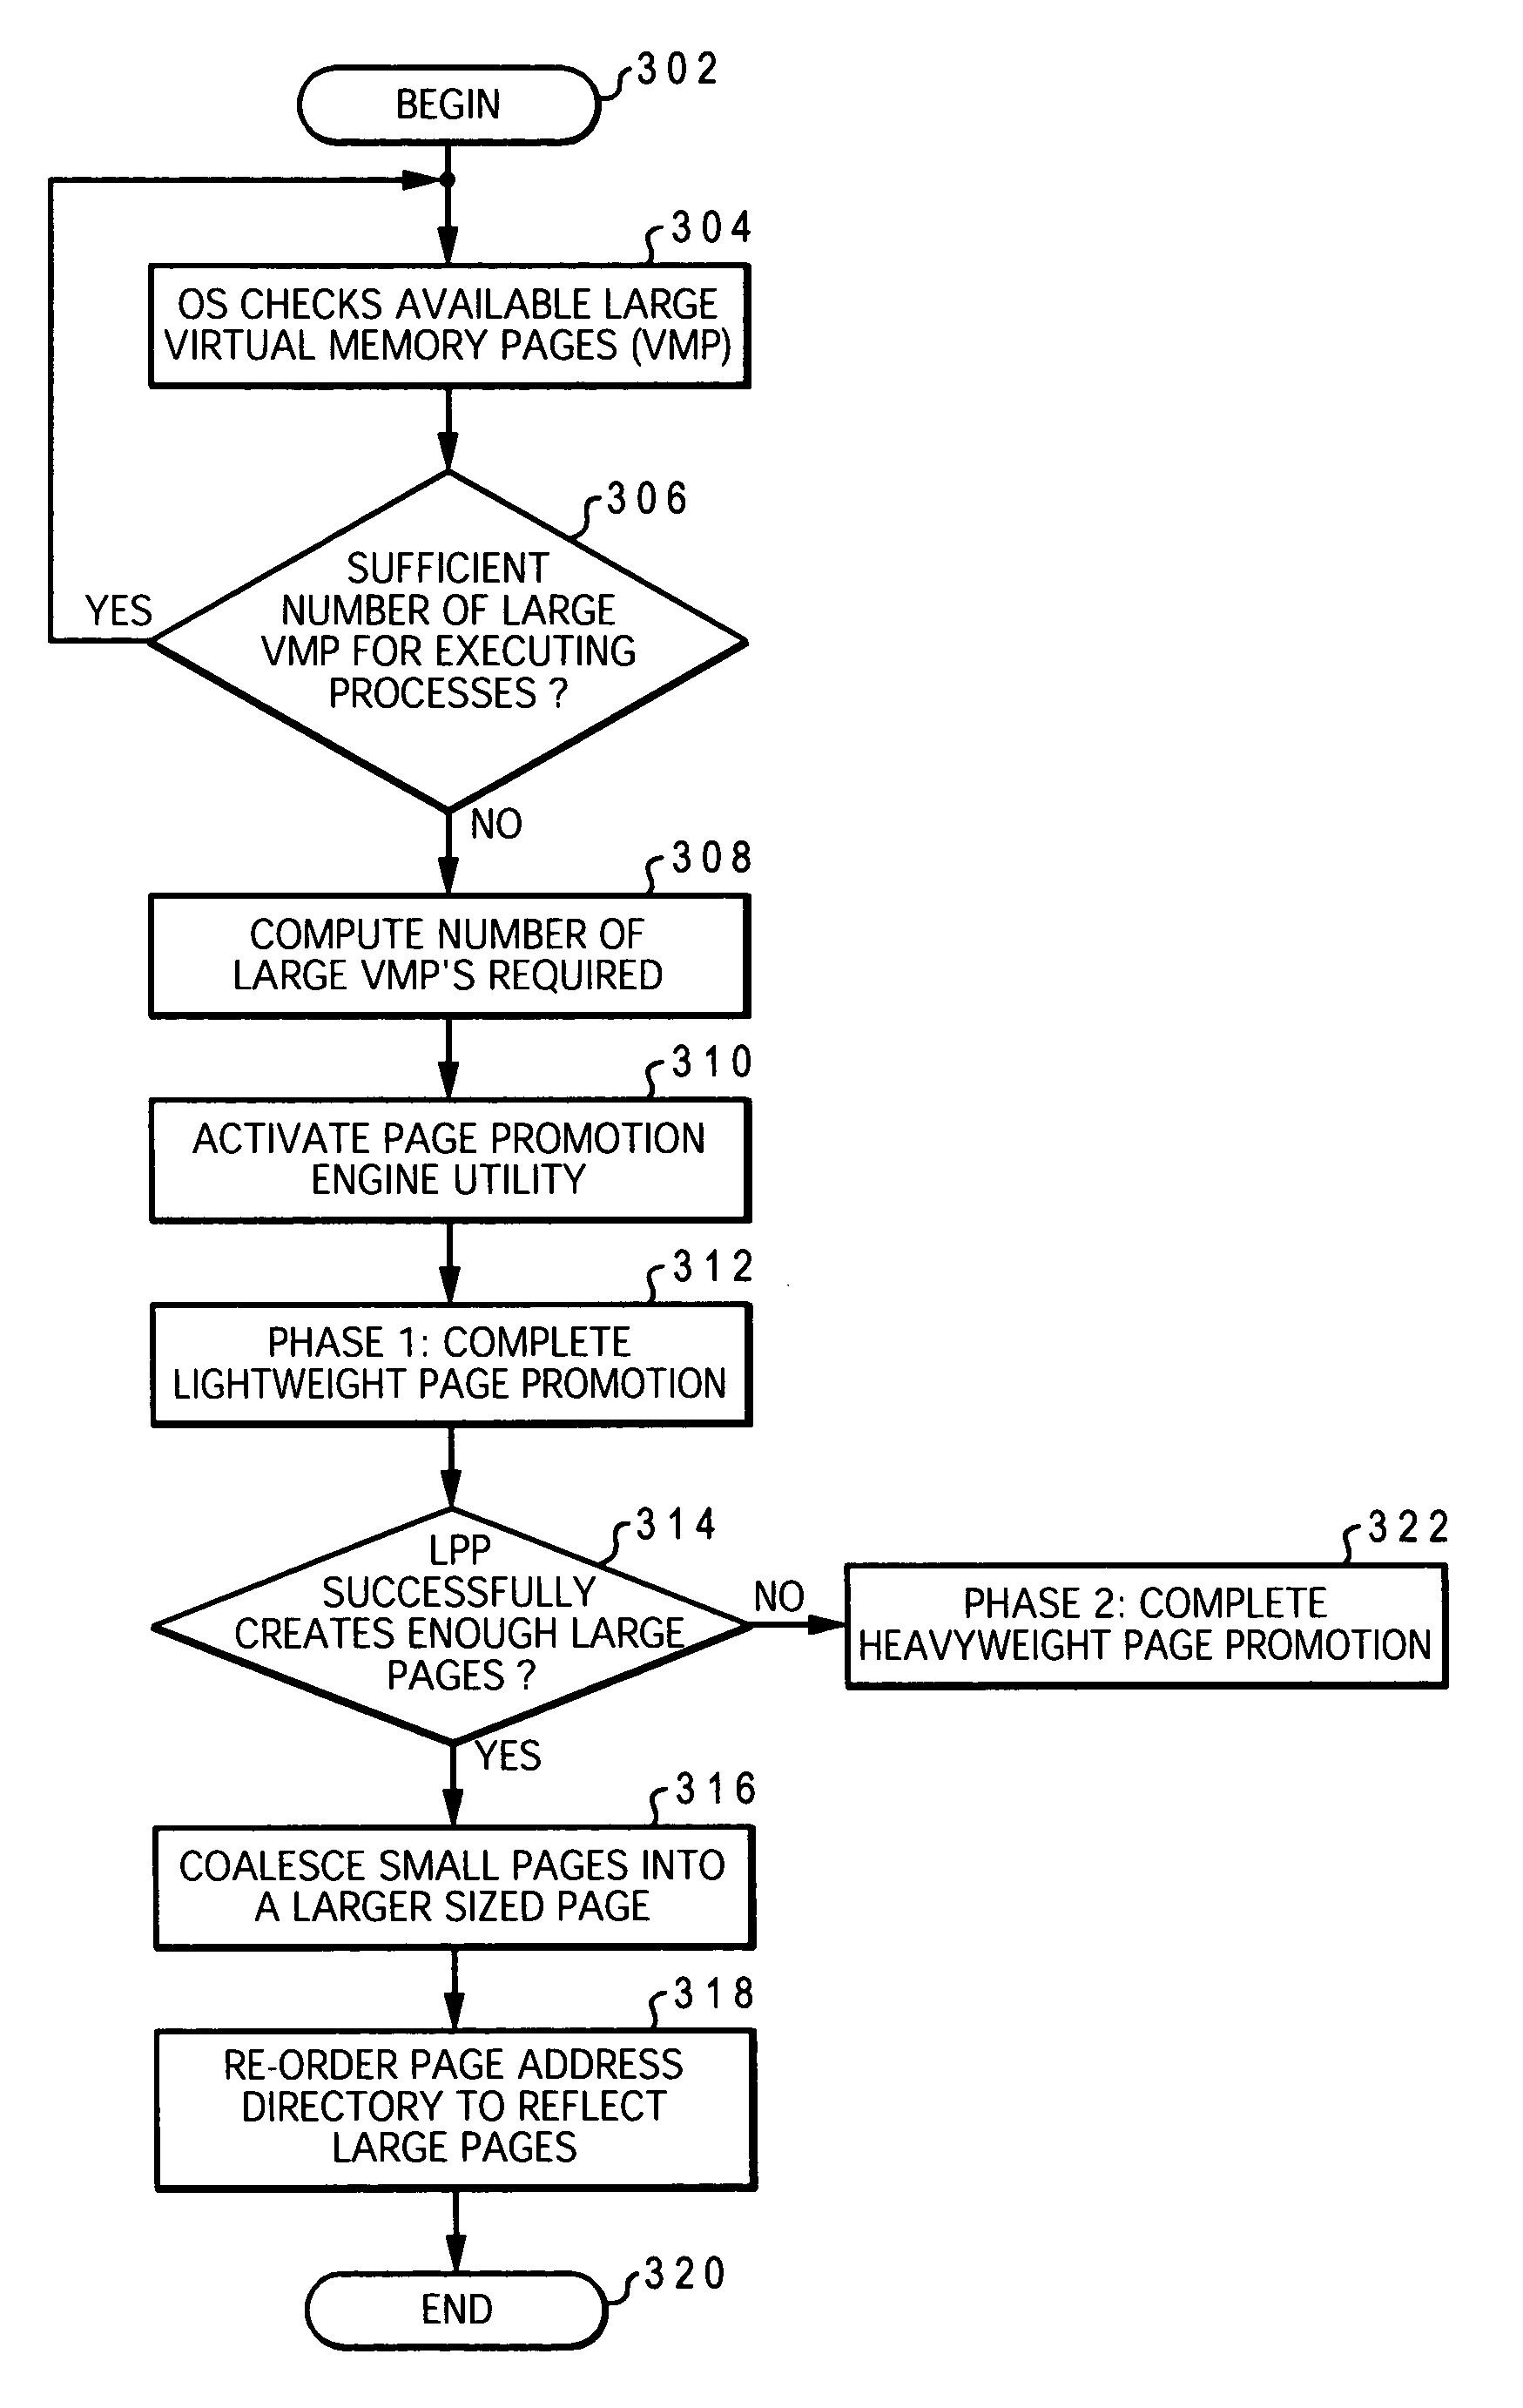 Method and mechanism for efficiently creating large virtual memory pages in a multiple page size environment